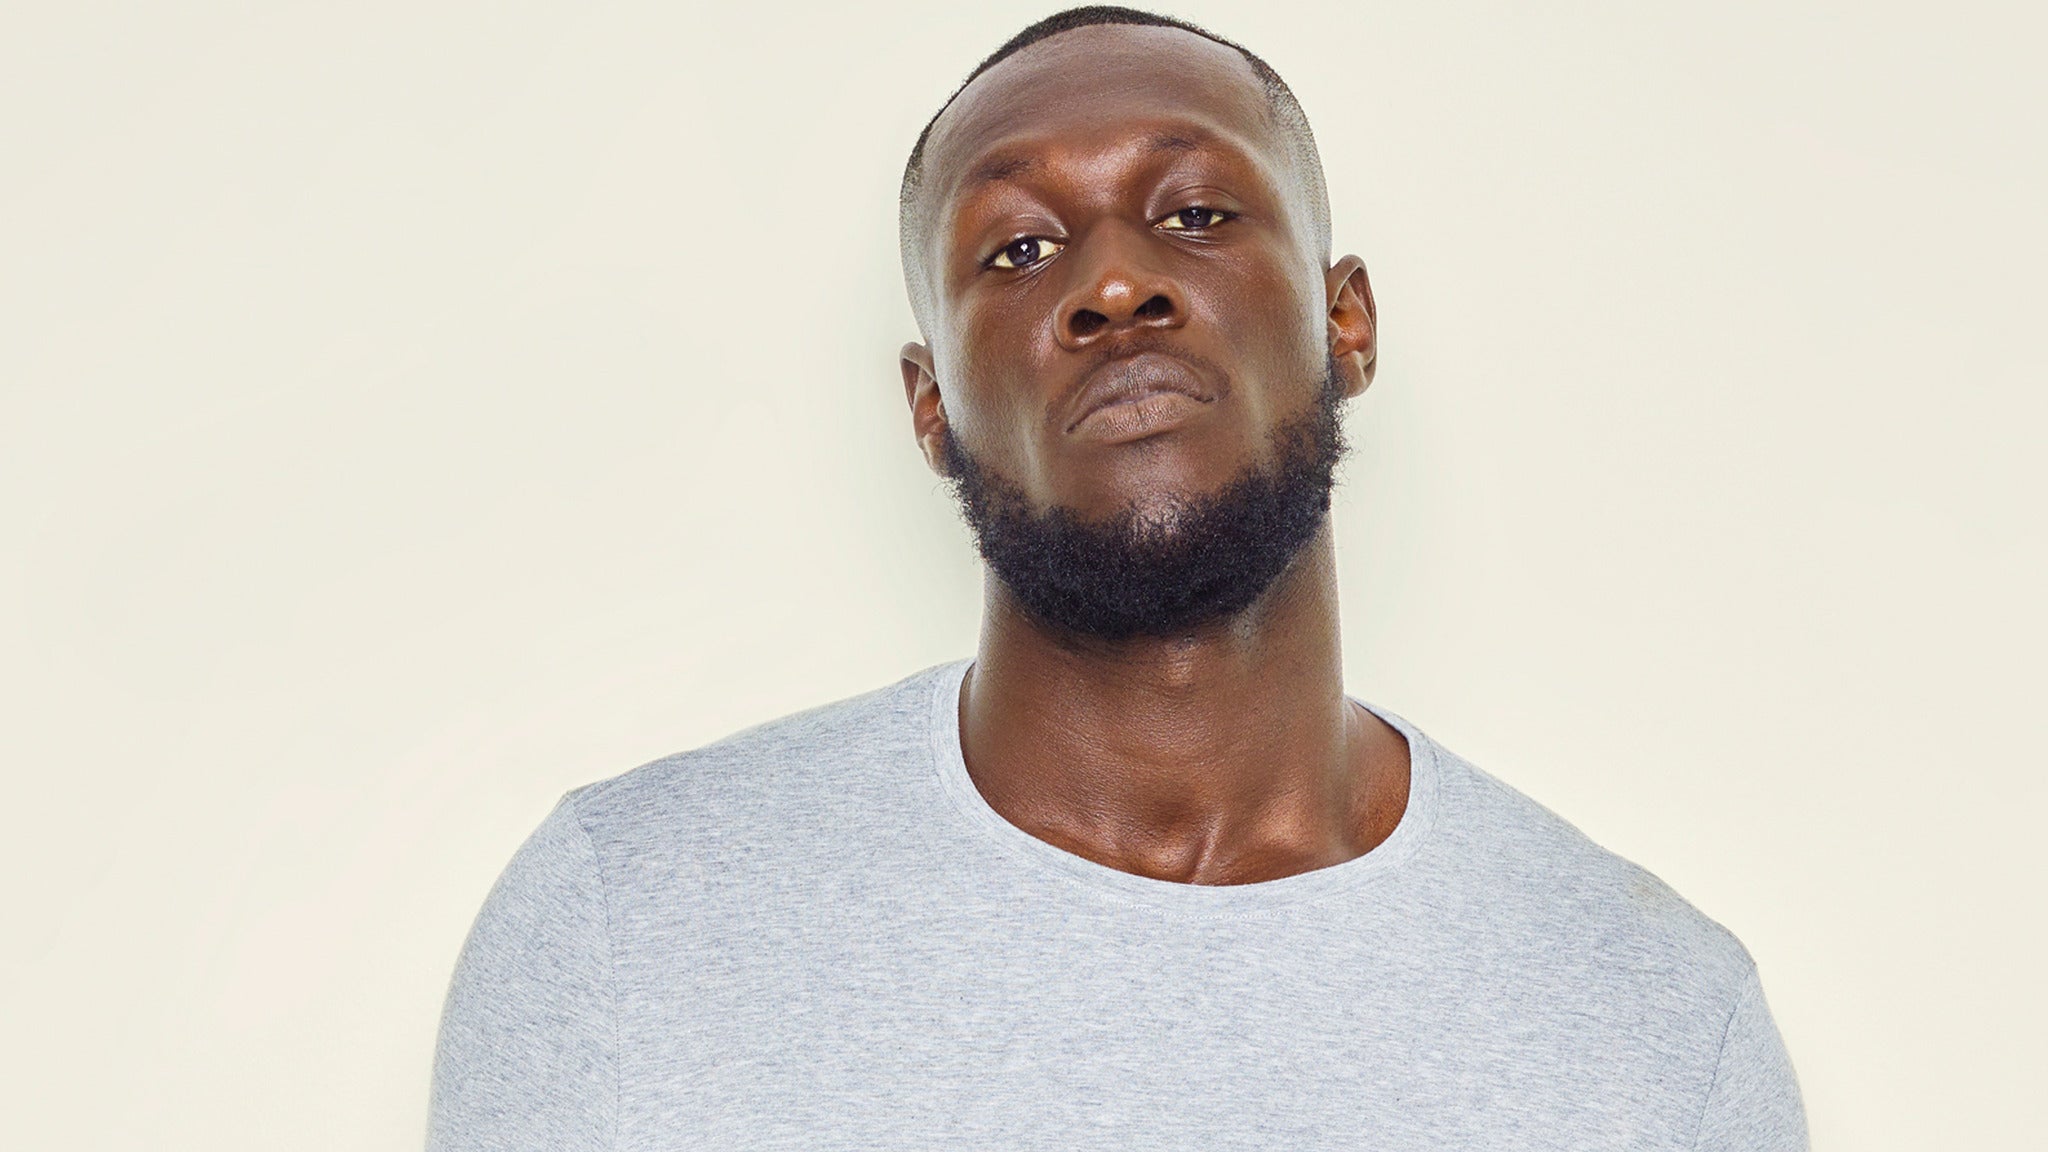 Stormzy in Oakland promo photo for APE presale offer code